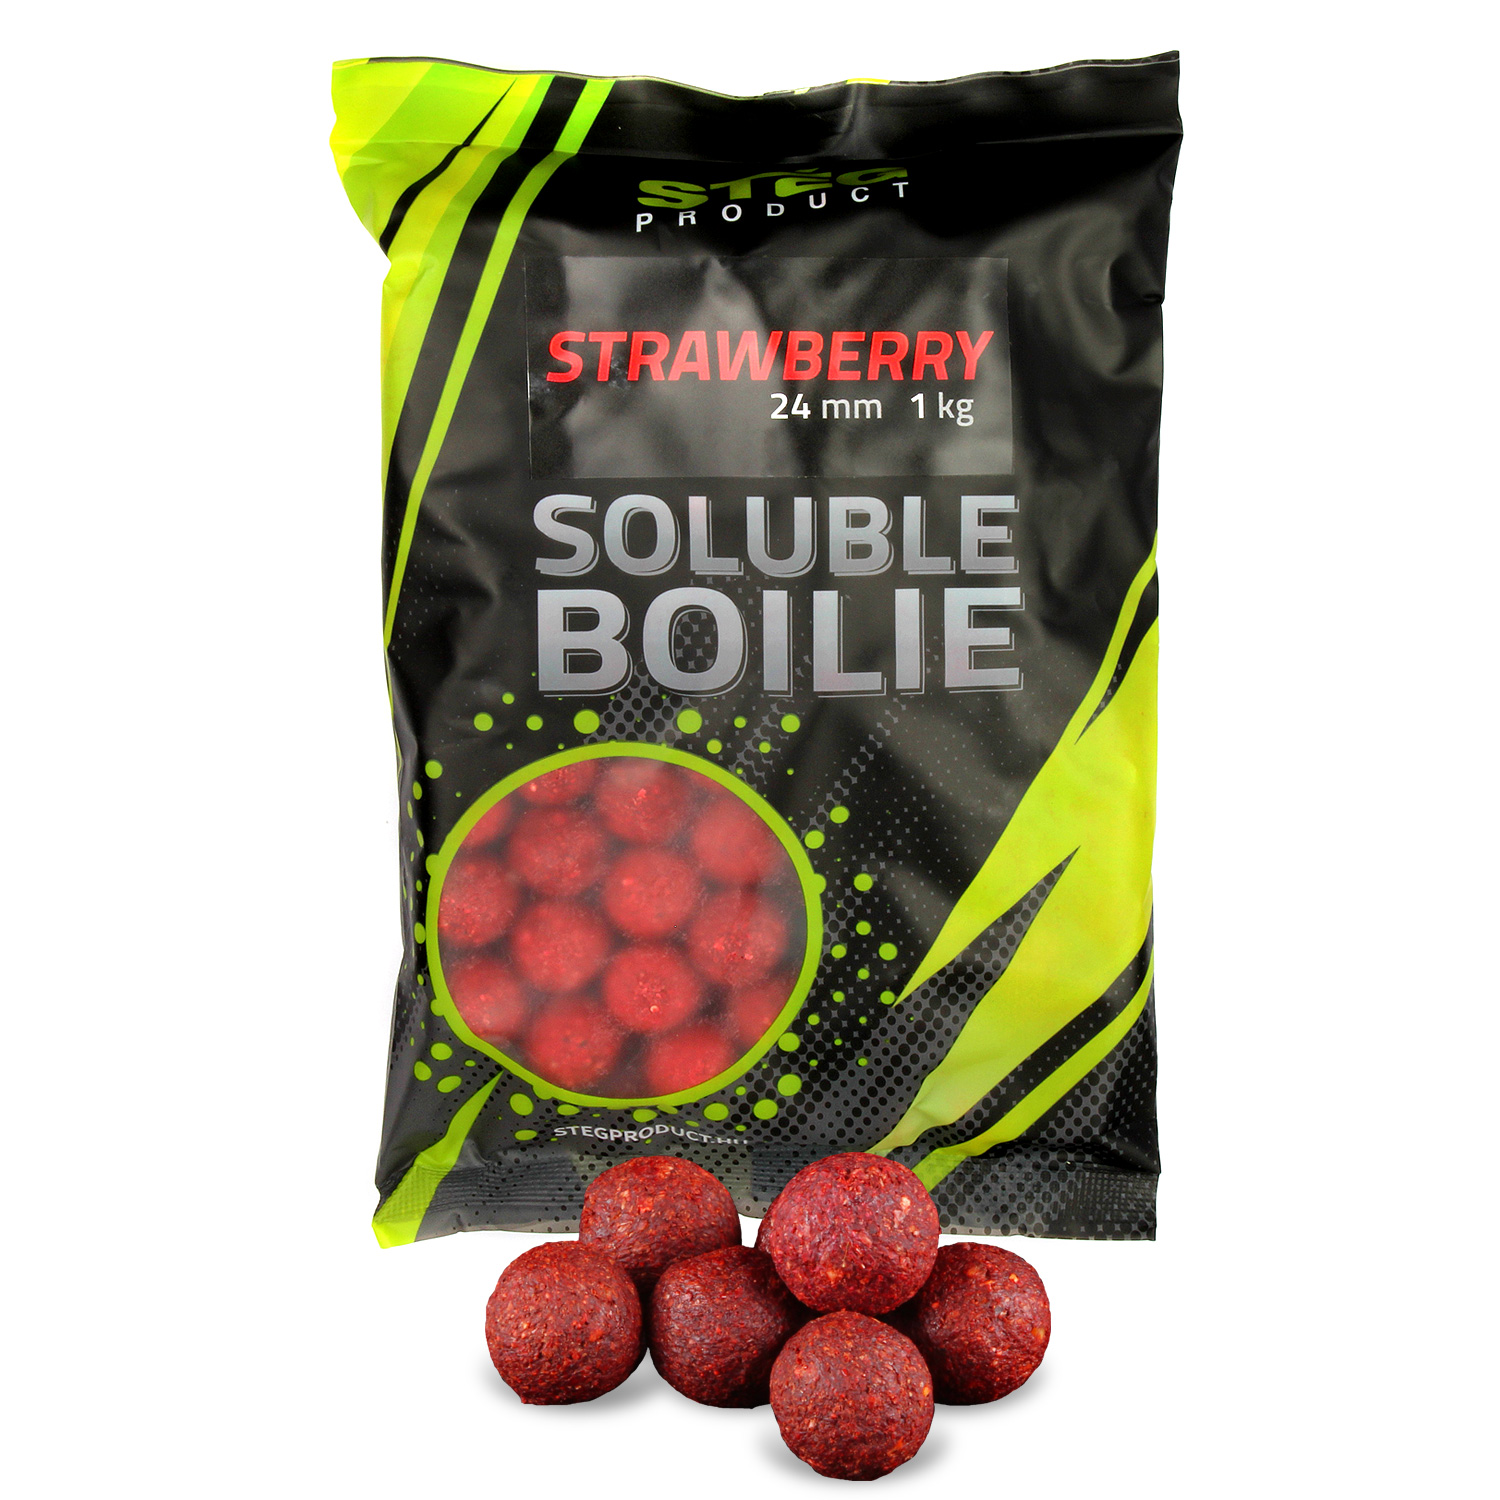 Stg Product Soluble Boilie 24mm Strawberry 1kg